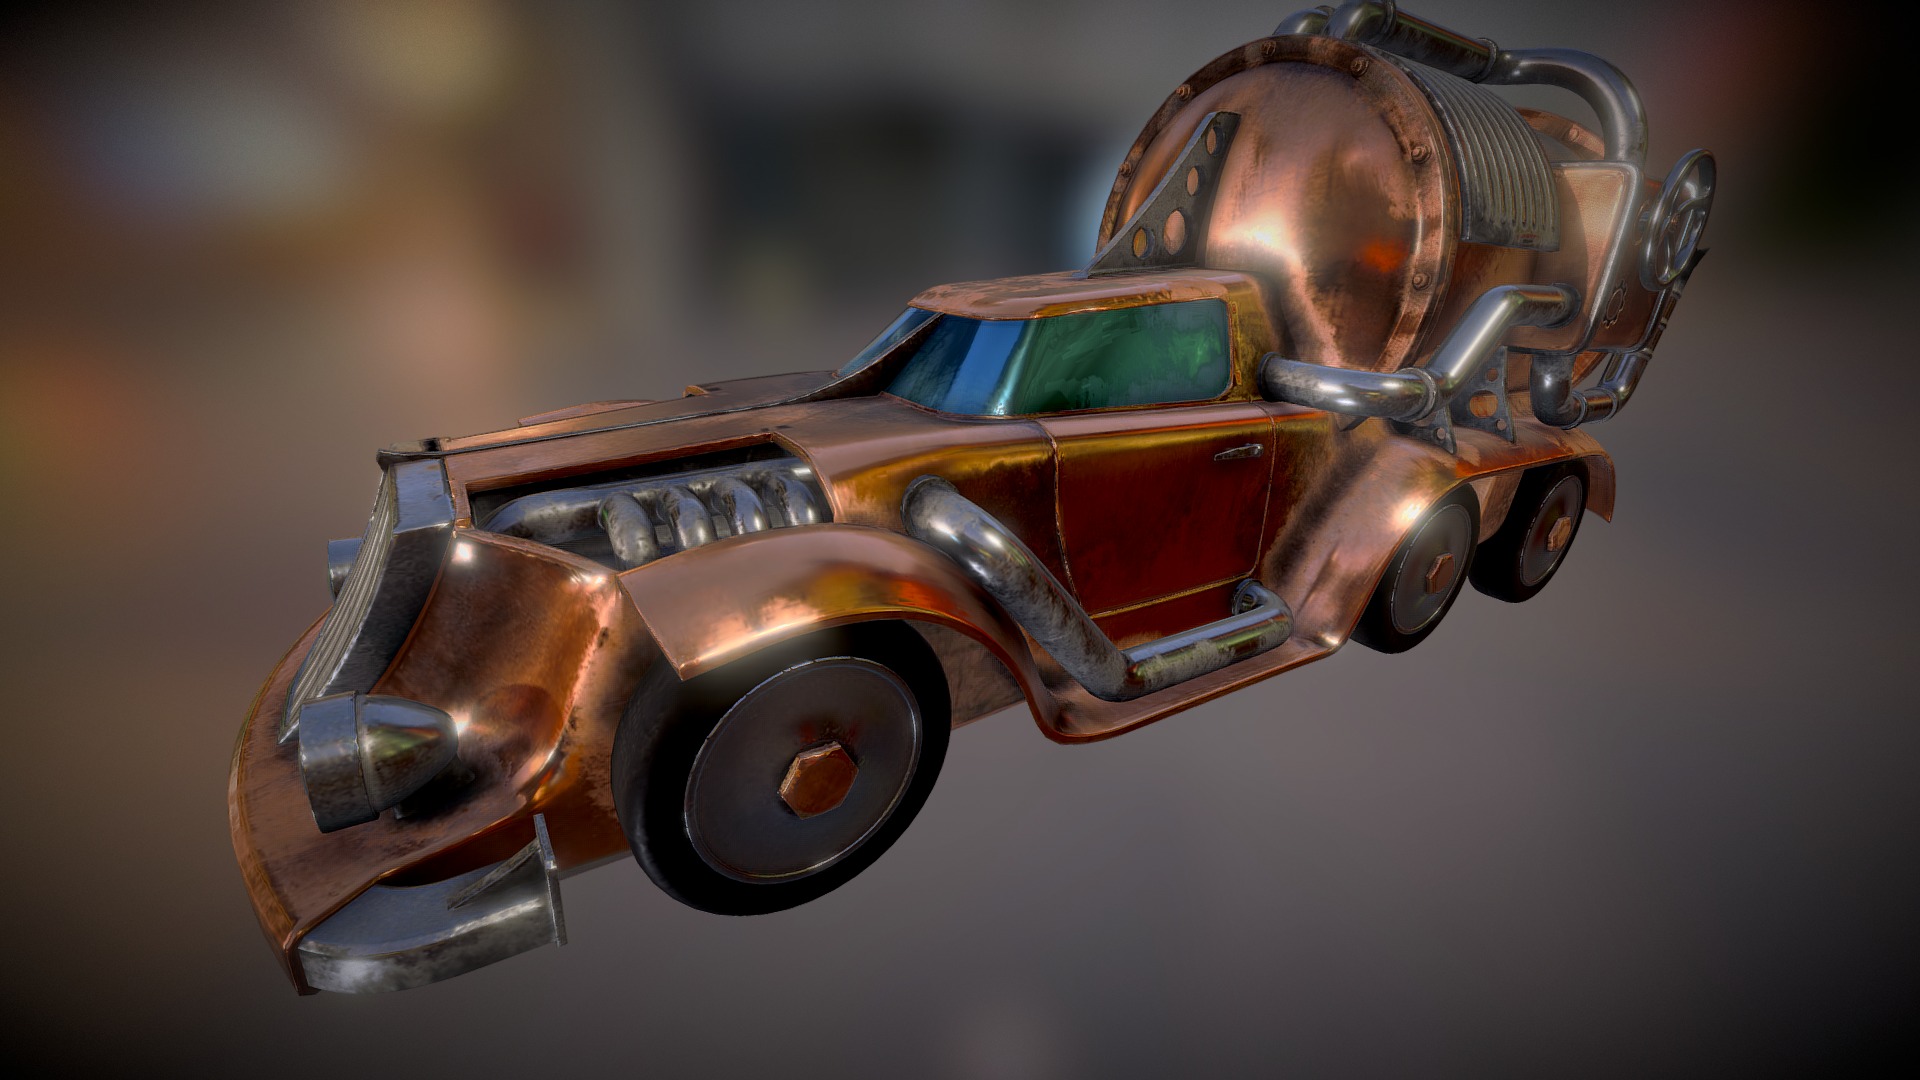 3D model Car steampunk PBR lowpoly - This is a 3D model of the Car steampunk PBR lowpoly. The 3D model is about a toy robot with a gun.